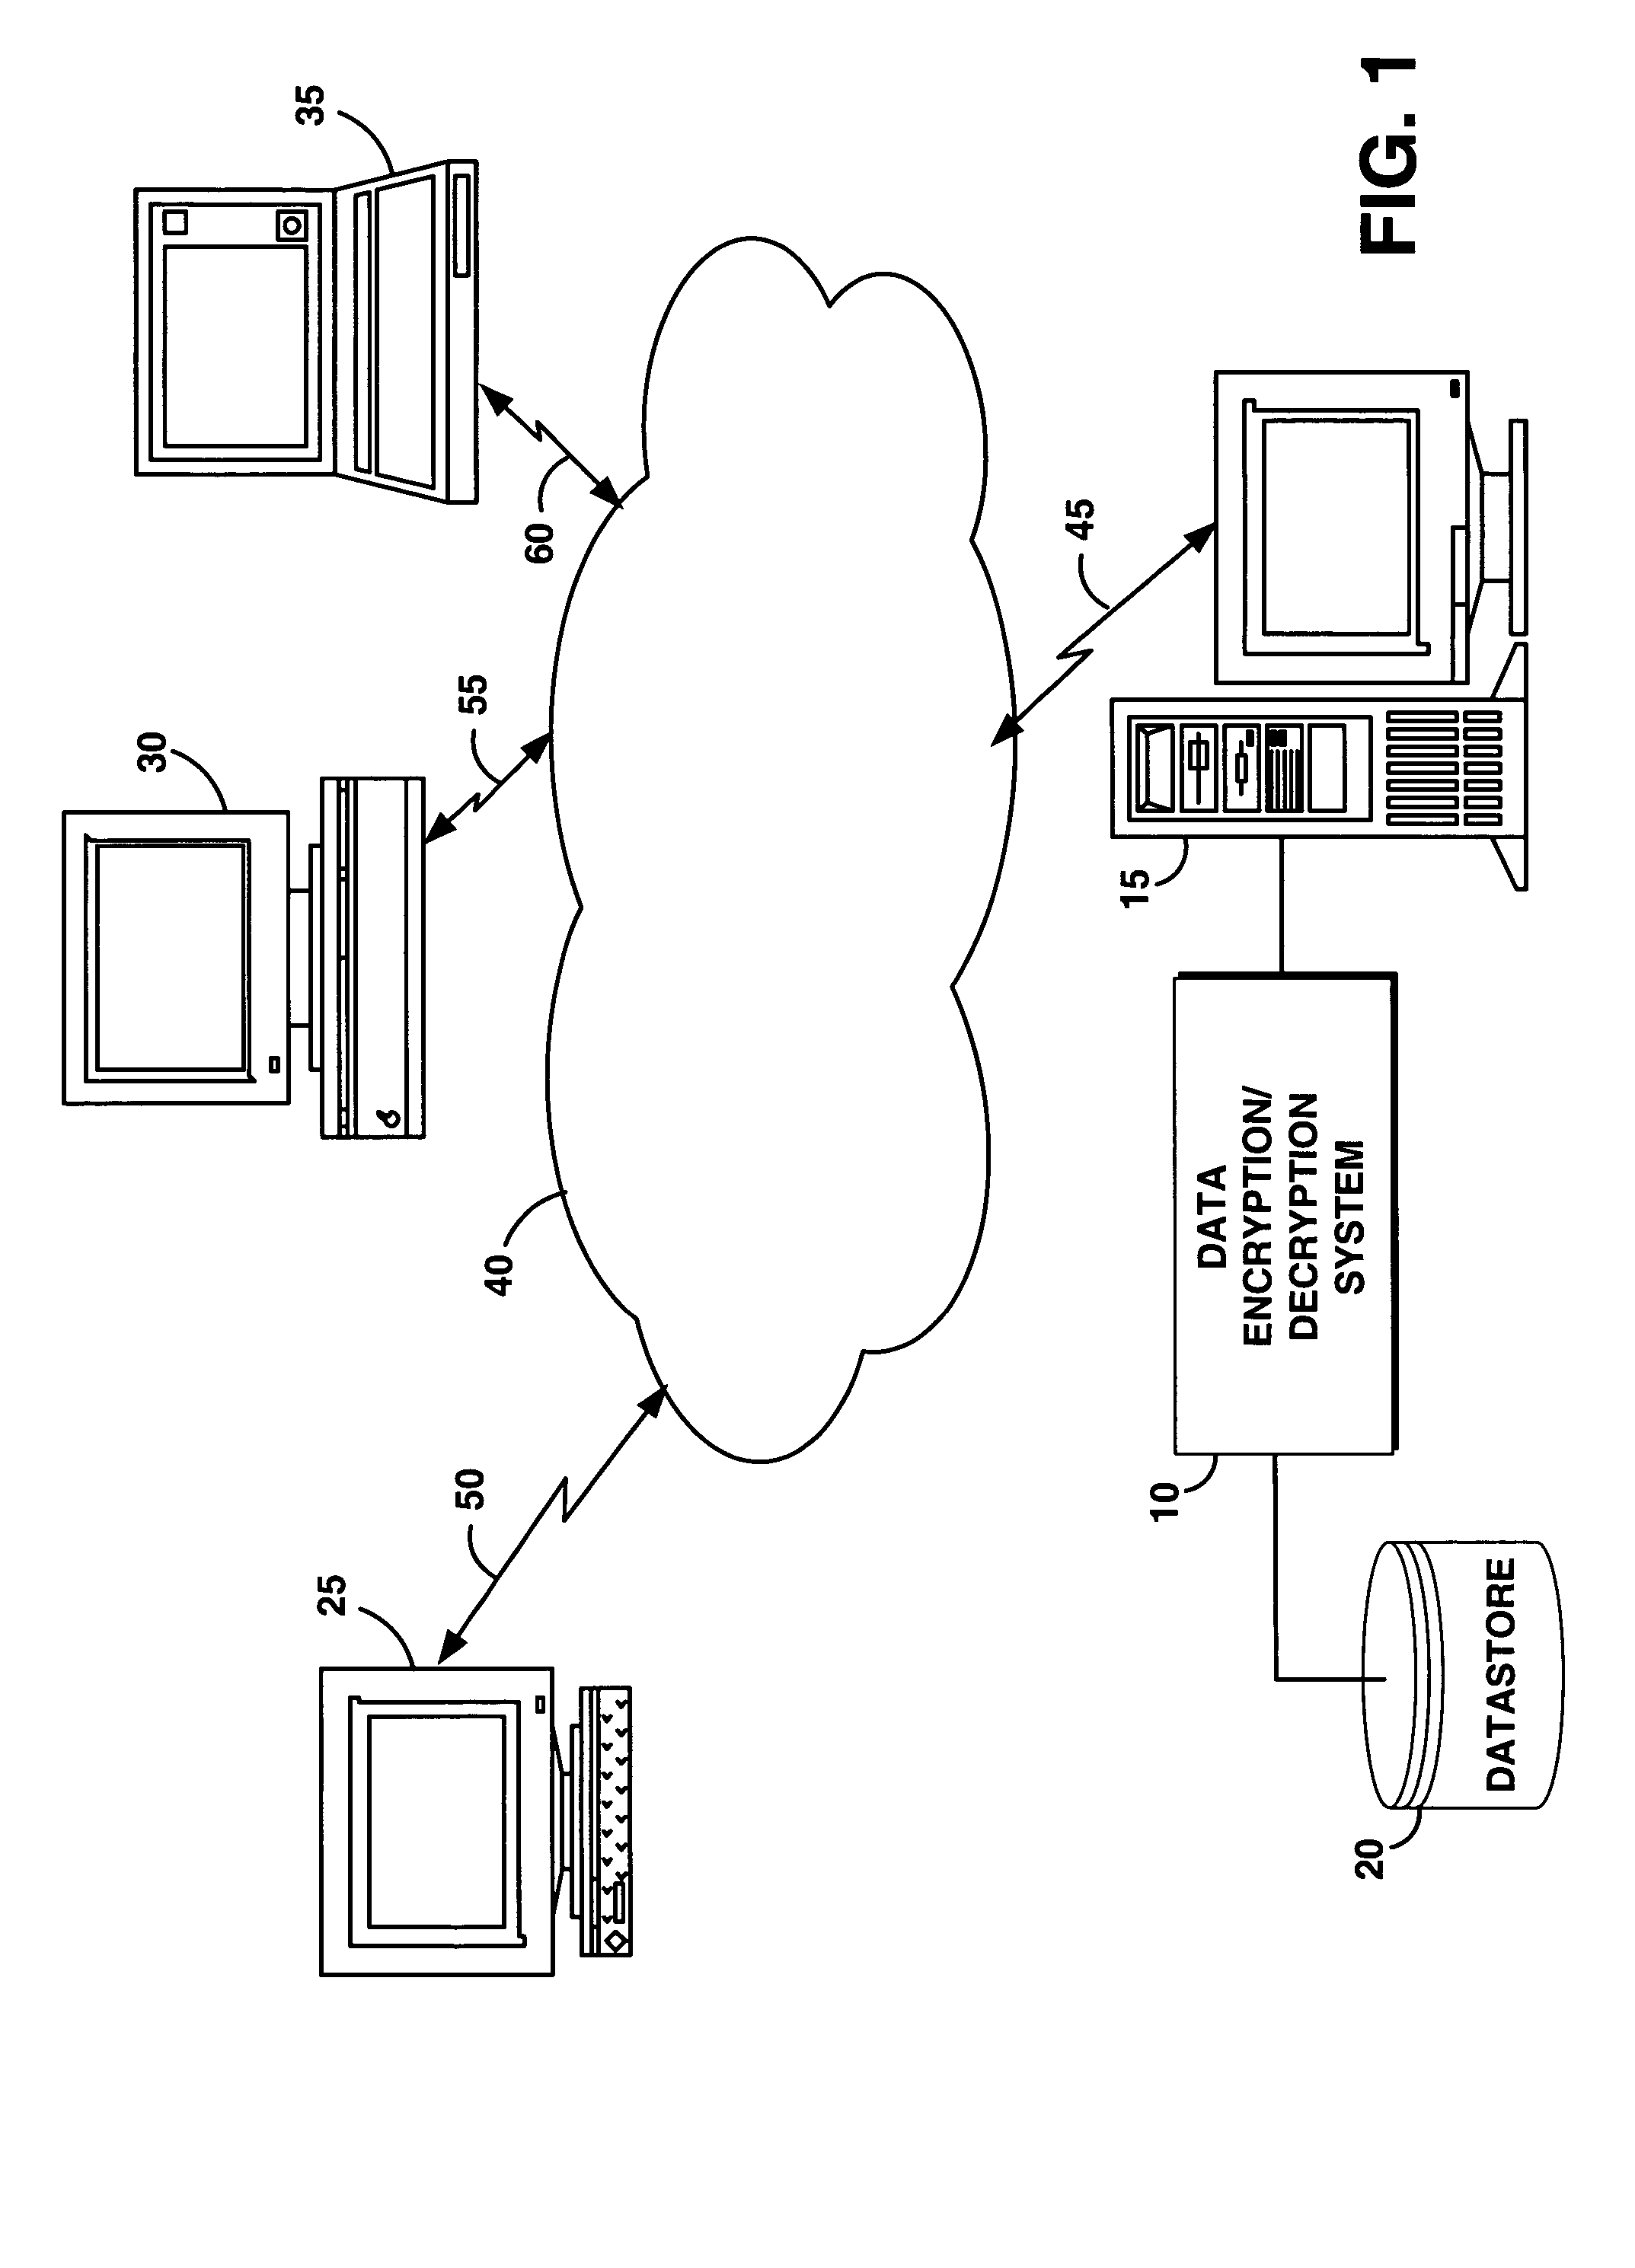 Method for encrypting and decrypting data using derivative equations and factors